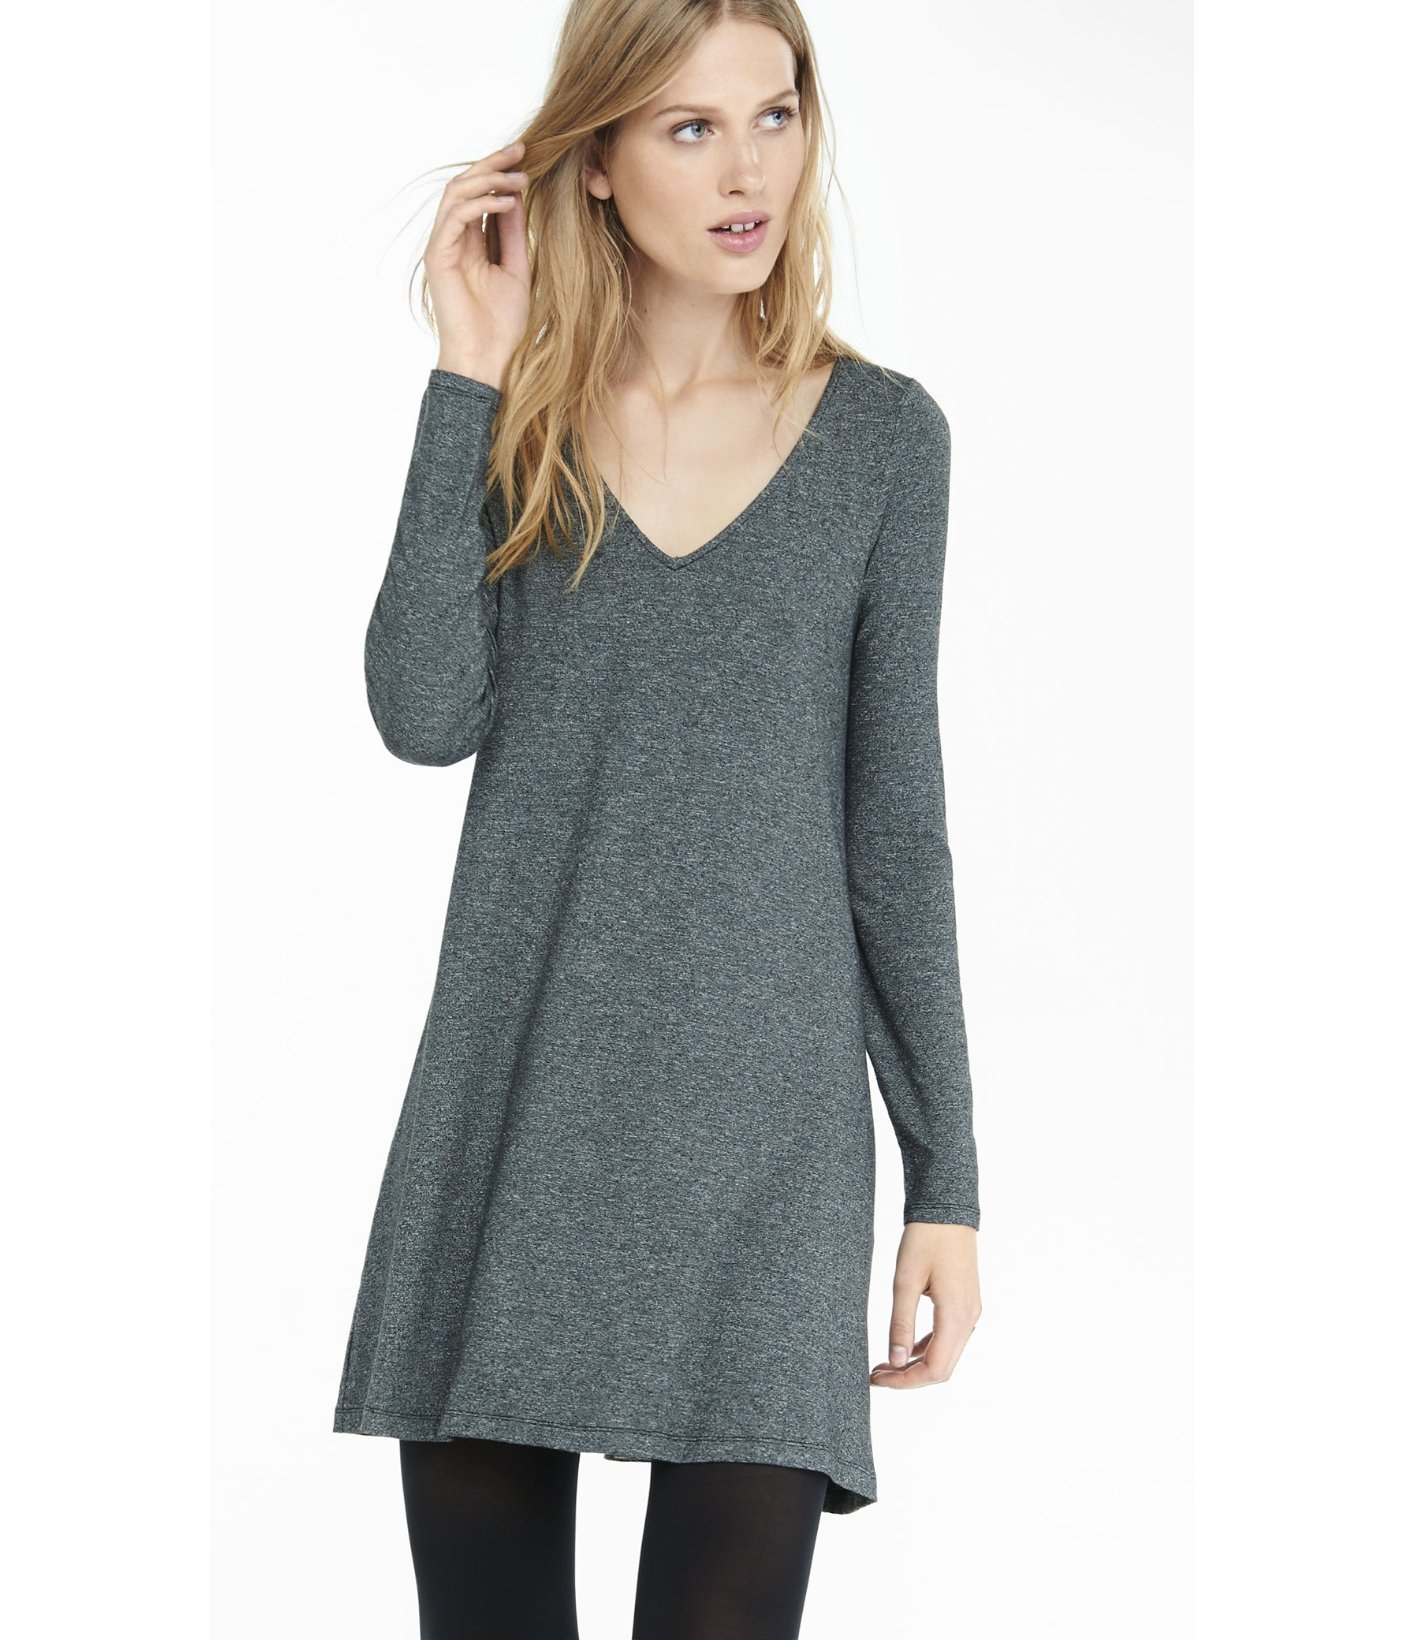 Lyst - Express Marled Long Sleeve Trapeze Dress in Gray